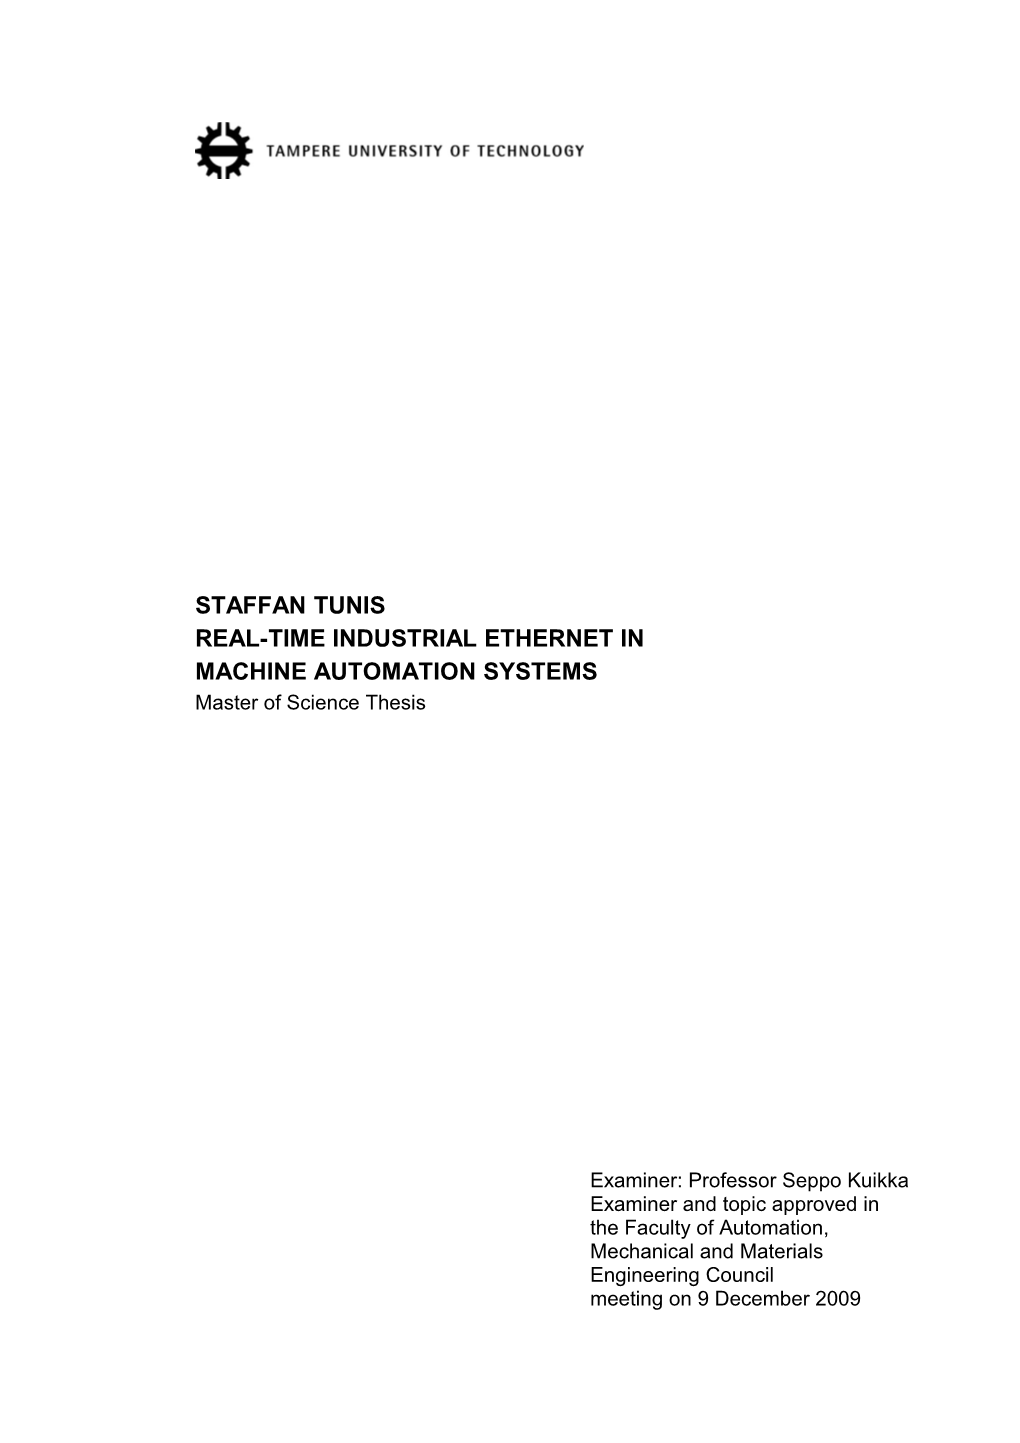 STAFFAN TUNIS REAL-TIME INDUSTRIAL ETHERNET in MACHINE AUTOMATION SYSTEMS Master of Science Thesis